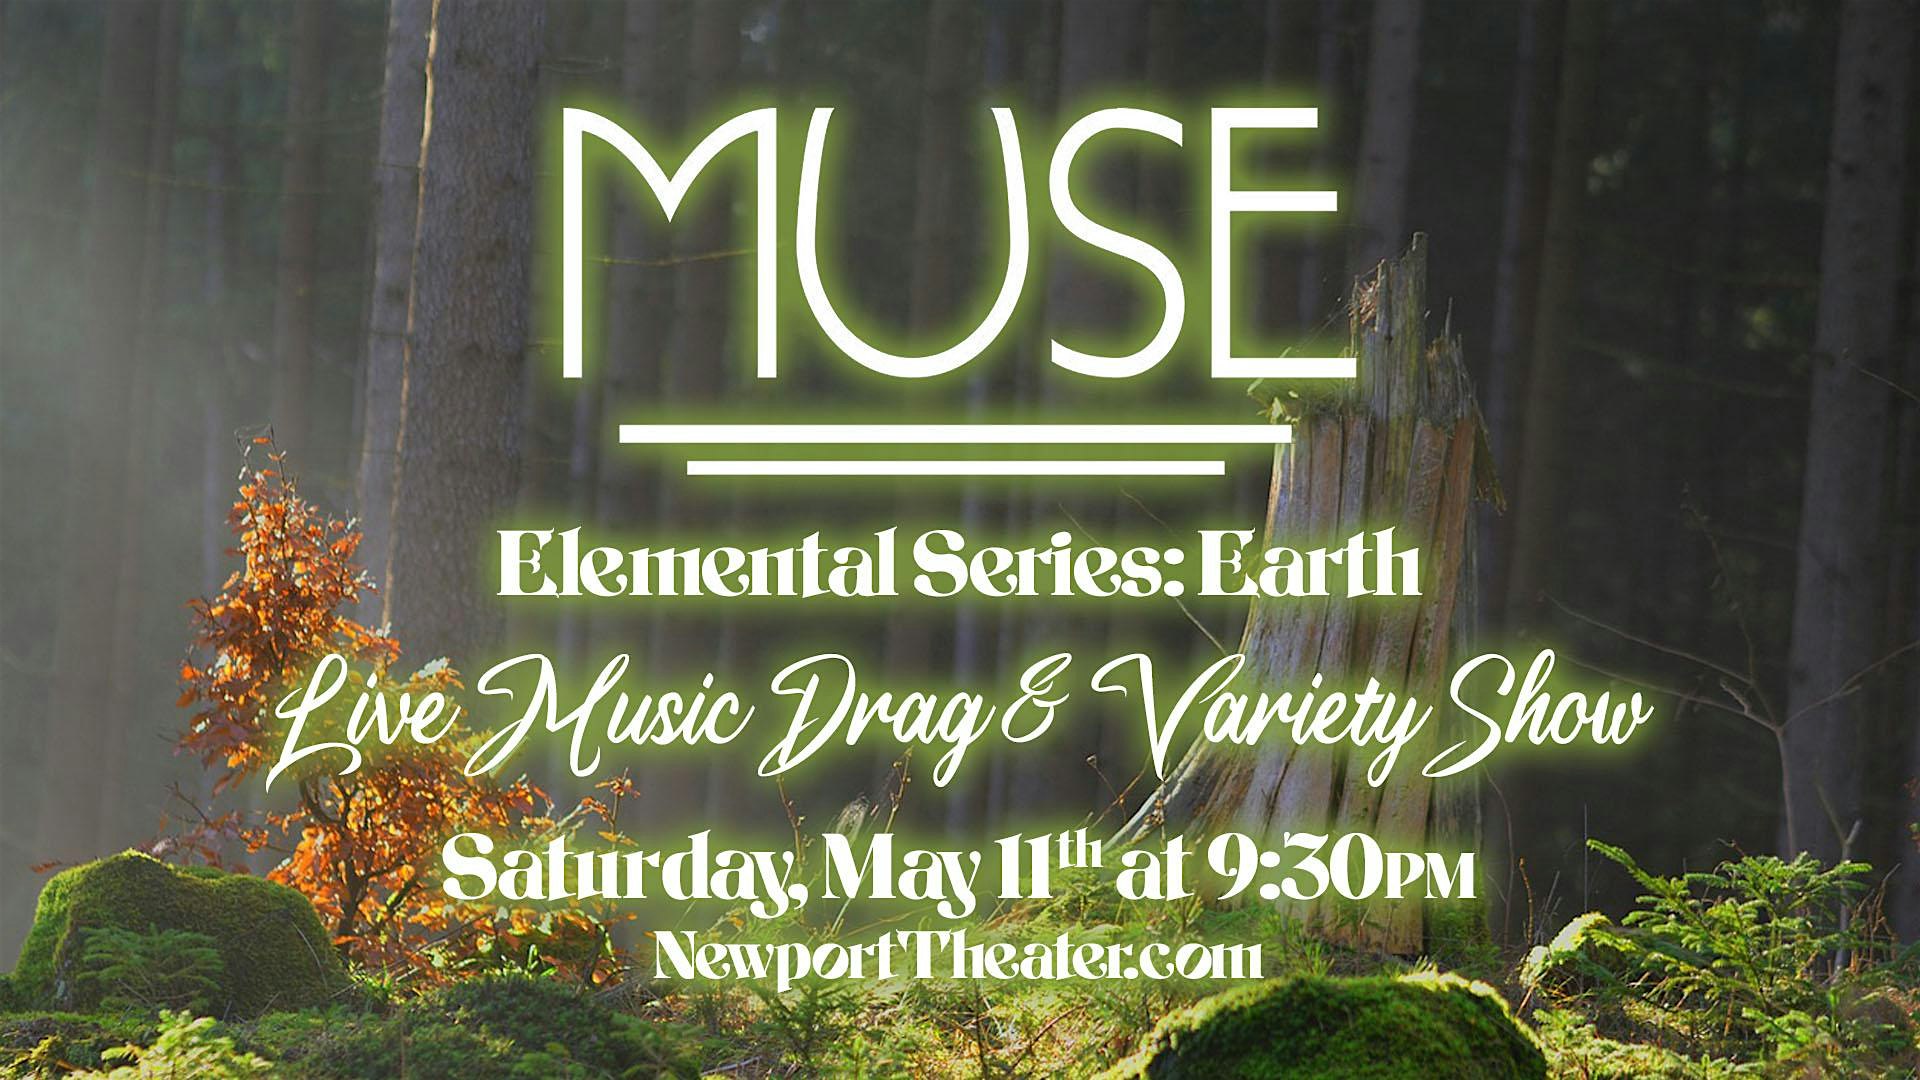 MUSE presents "Earth" - A Live Music Burlesque, Variety, and Drag Show